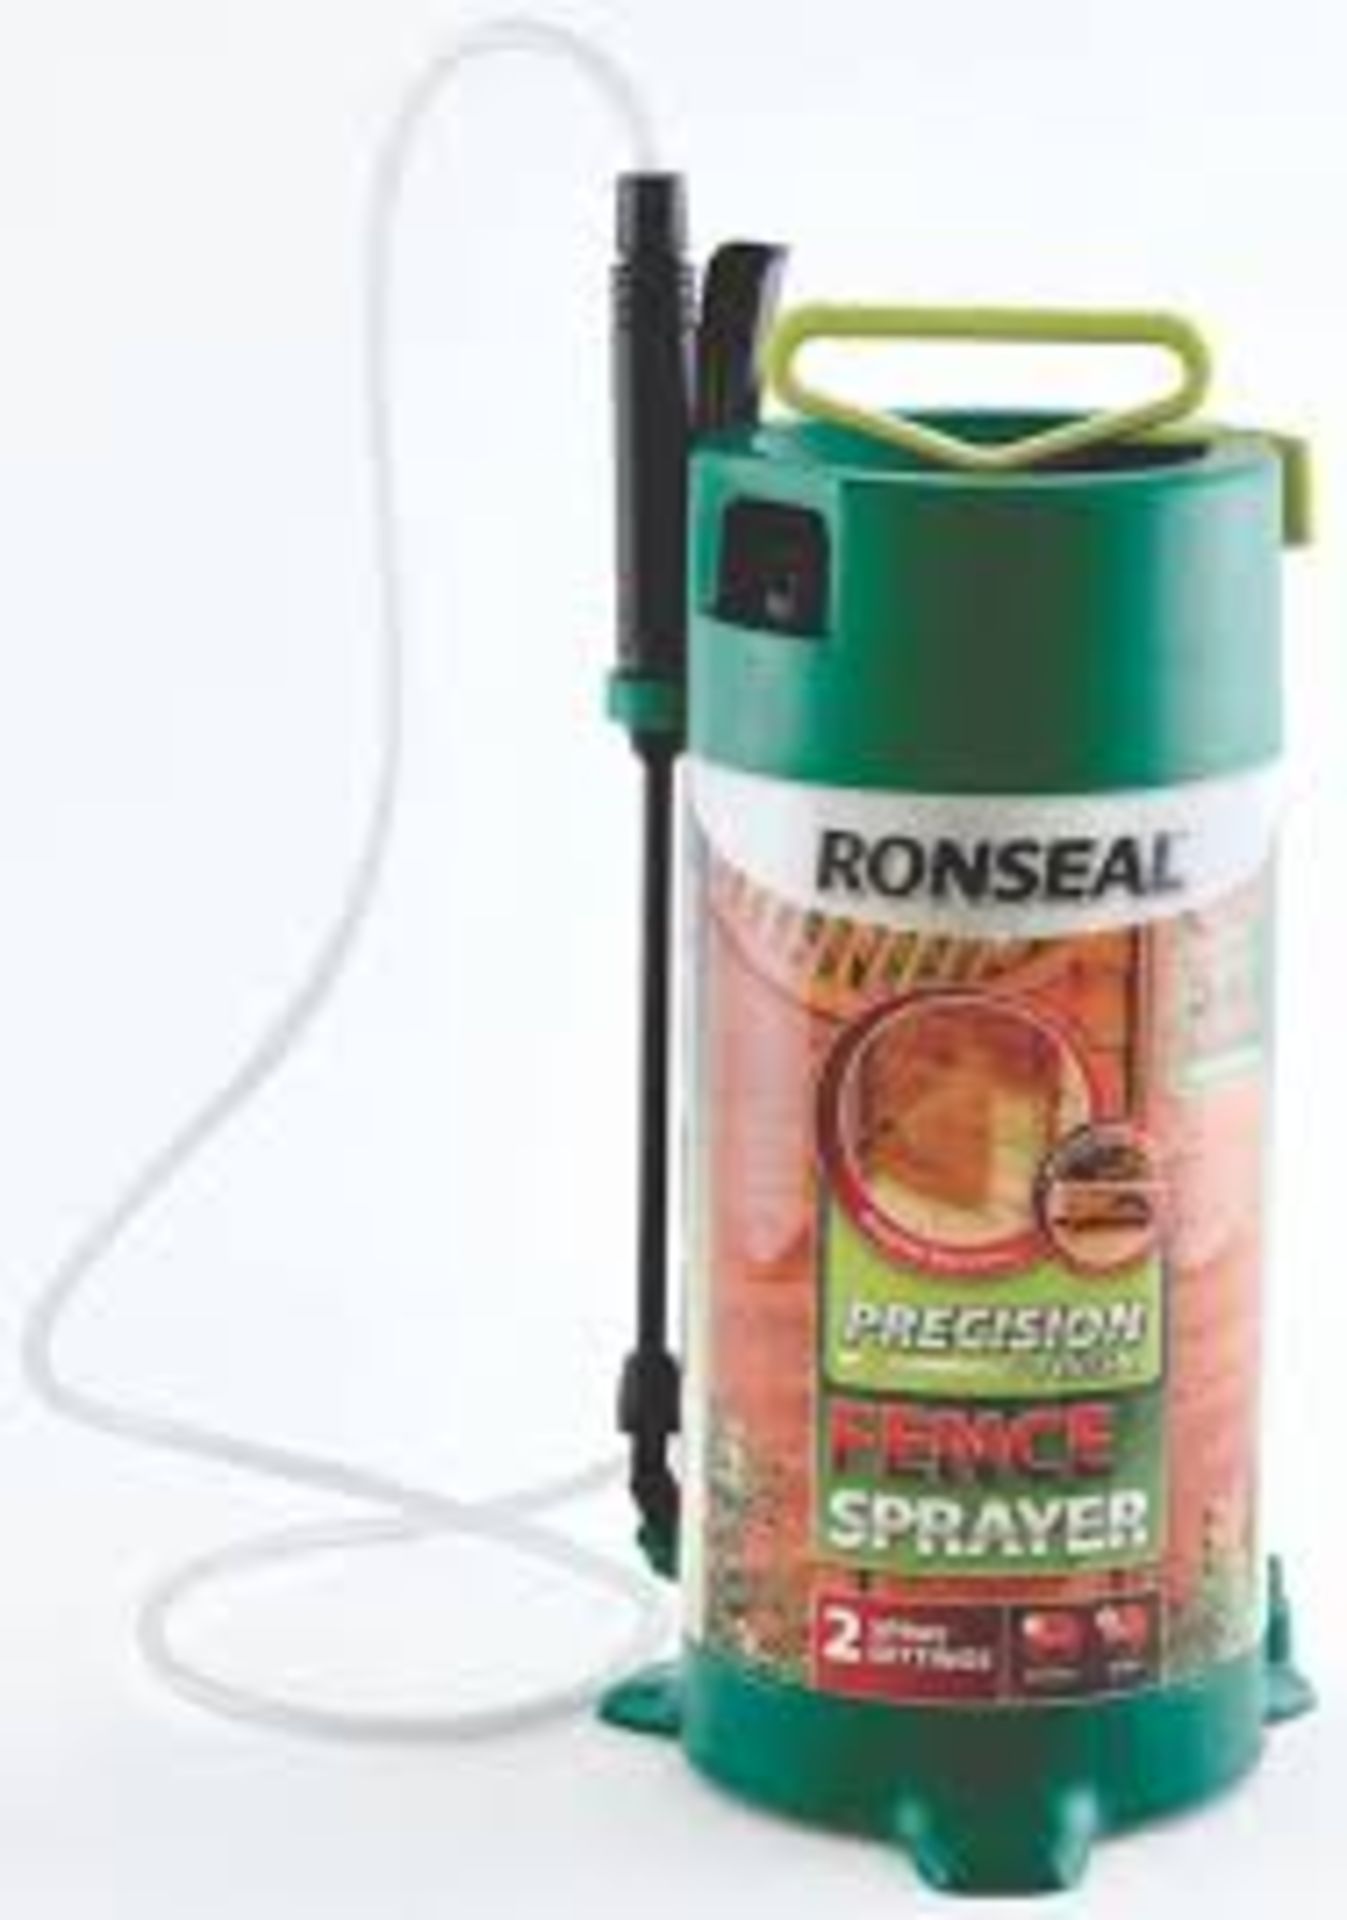 Ronseal Precision Finish Fence Sprayer 5Ltr. - P5.